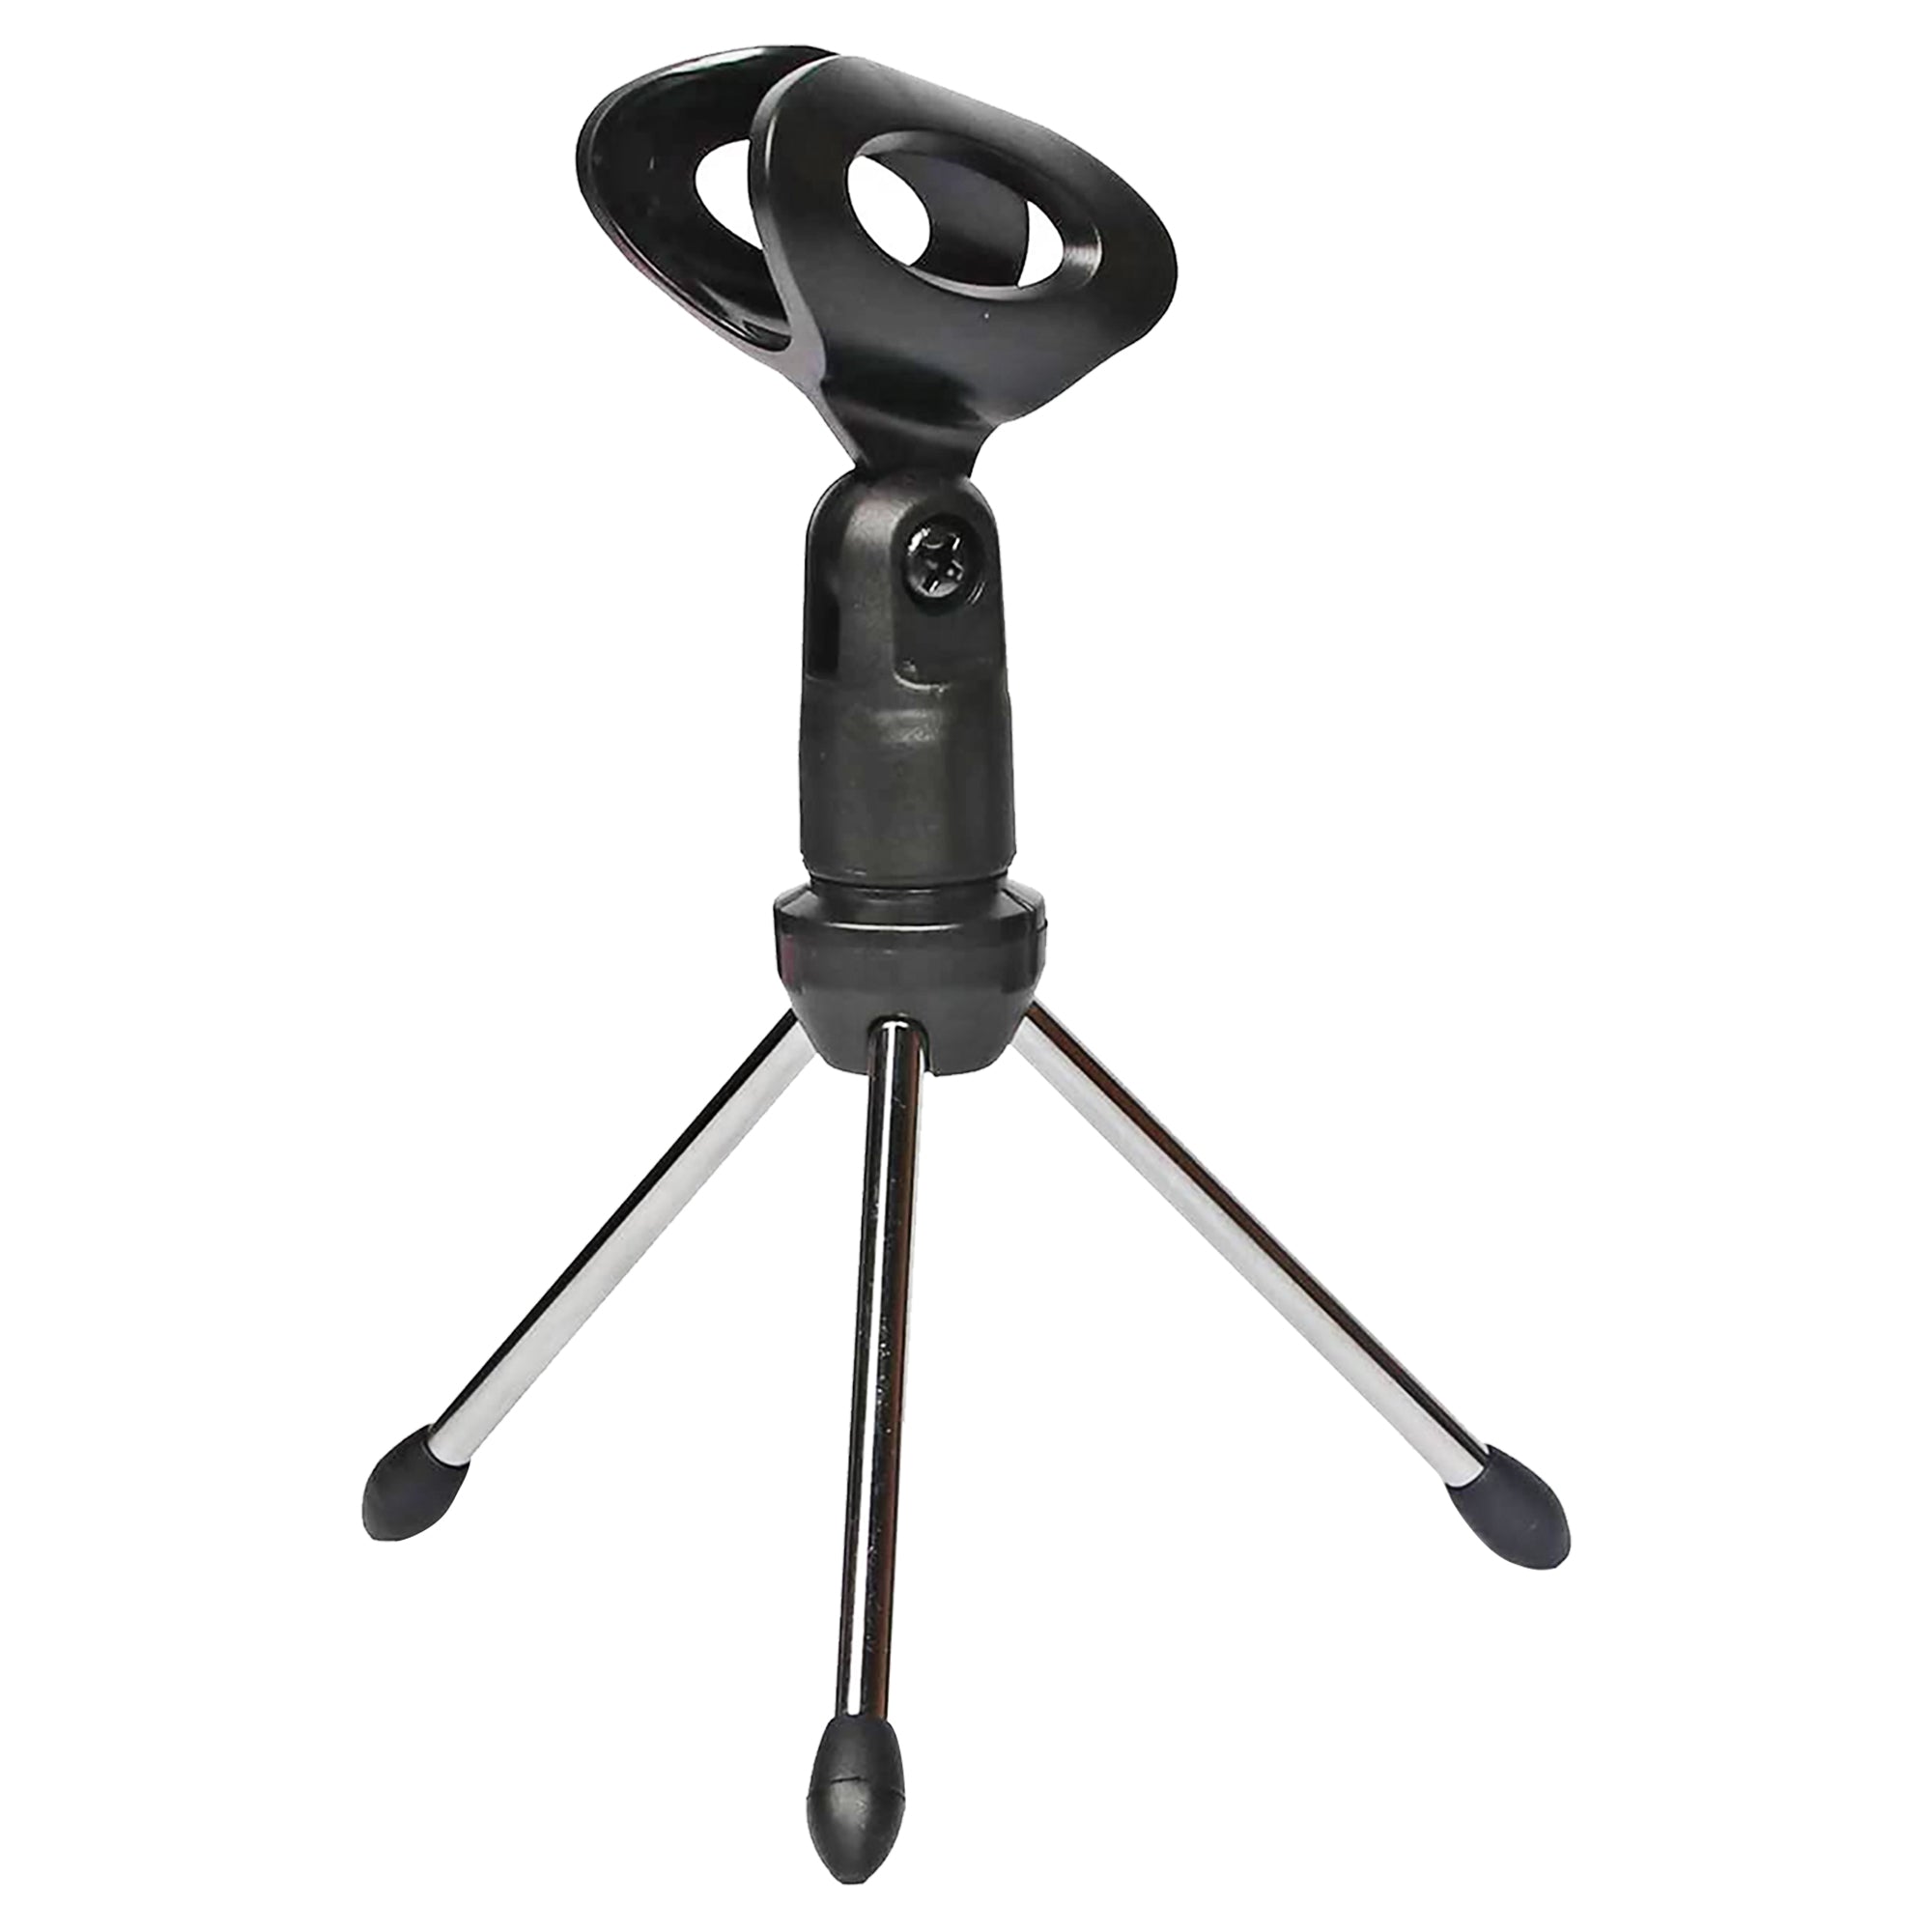 5 Core Universal Small Desktop Microphone Stand 1 Piece Adjustable Mic Clip Tabletop Mic Stand For Dynamic Wired Microphone Like Samson Q2U Shure SM58 SM57 PGA48 PGA58 - MINI TRIPOD MIC STAND